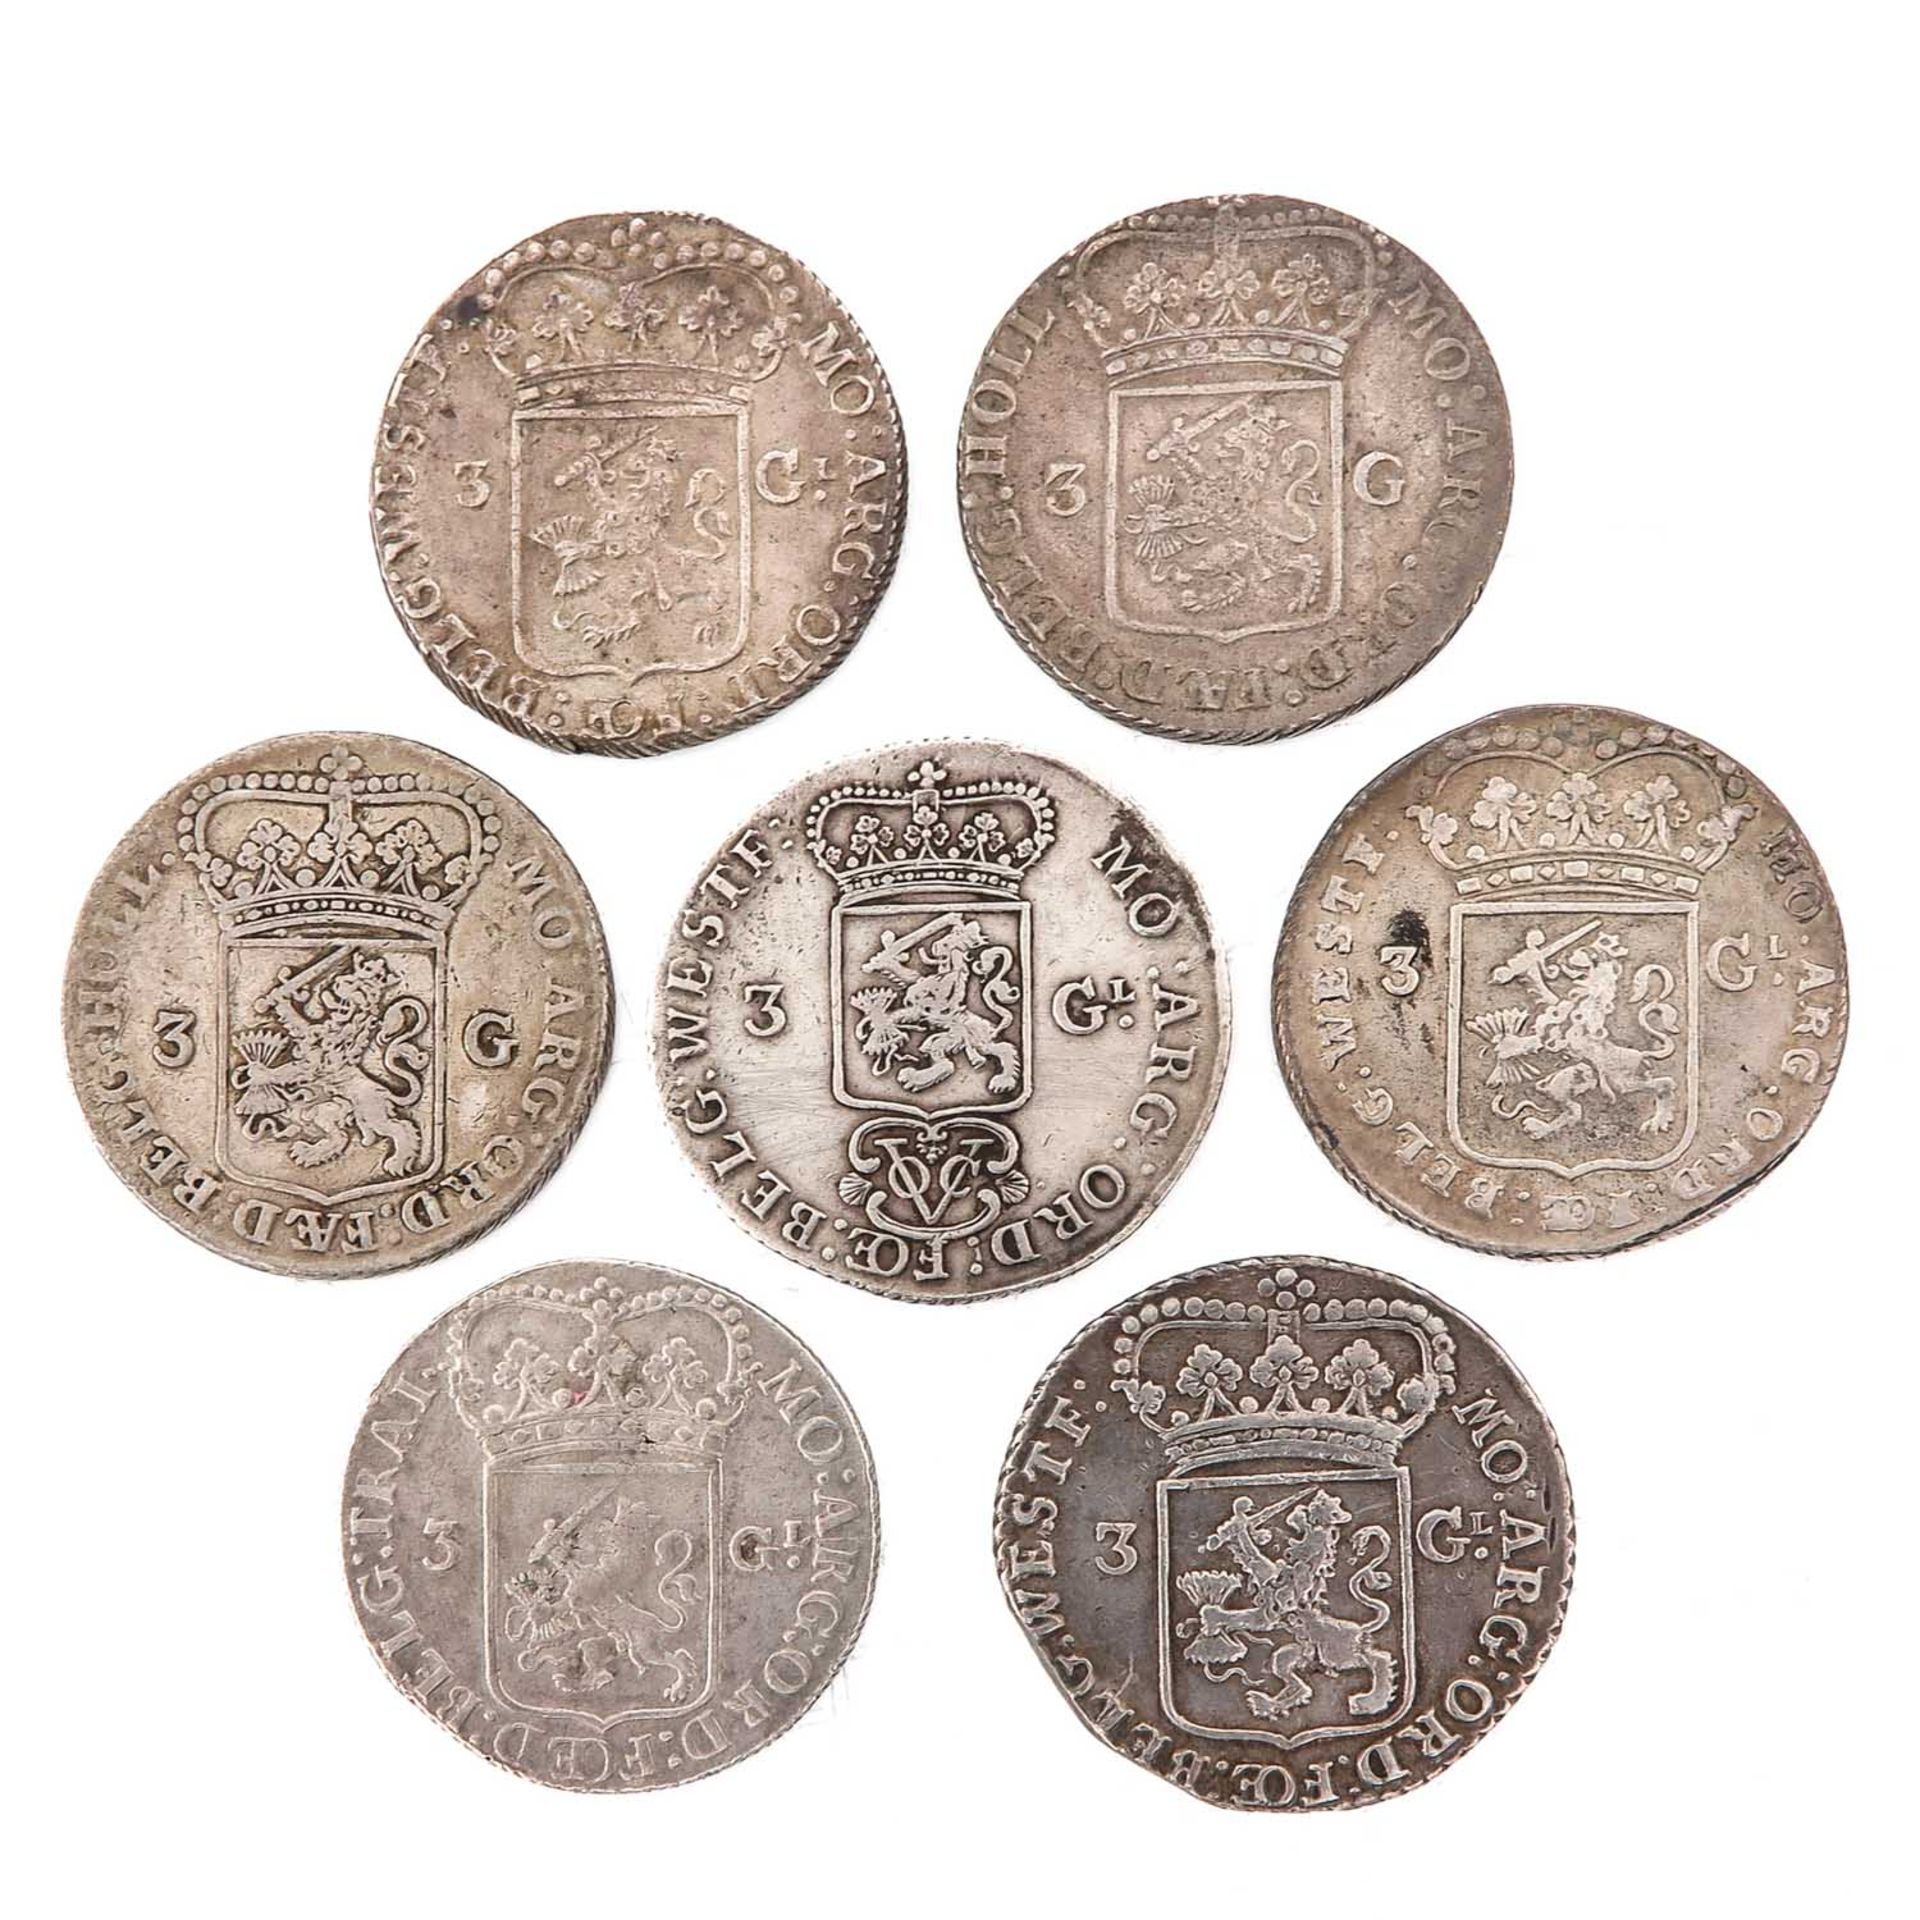 A Collection of 7 Coins